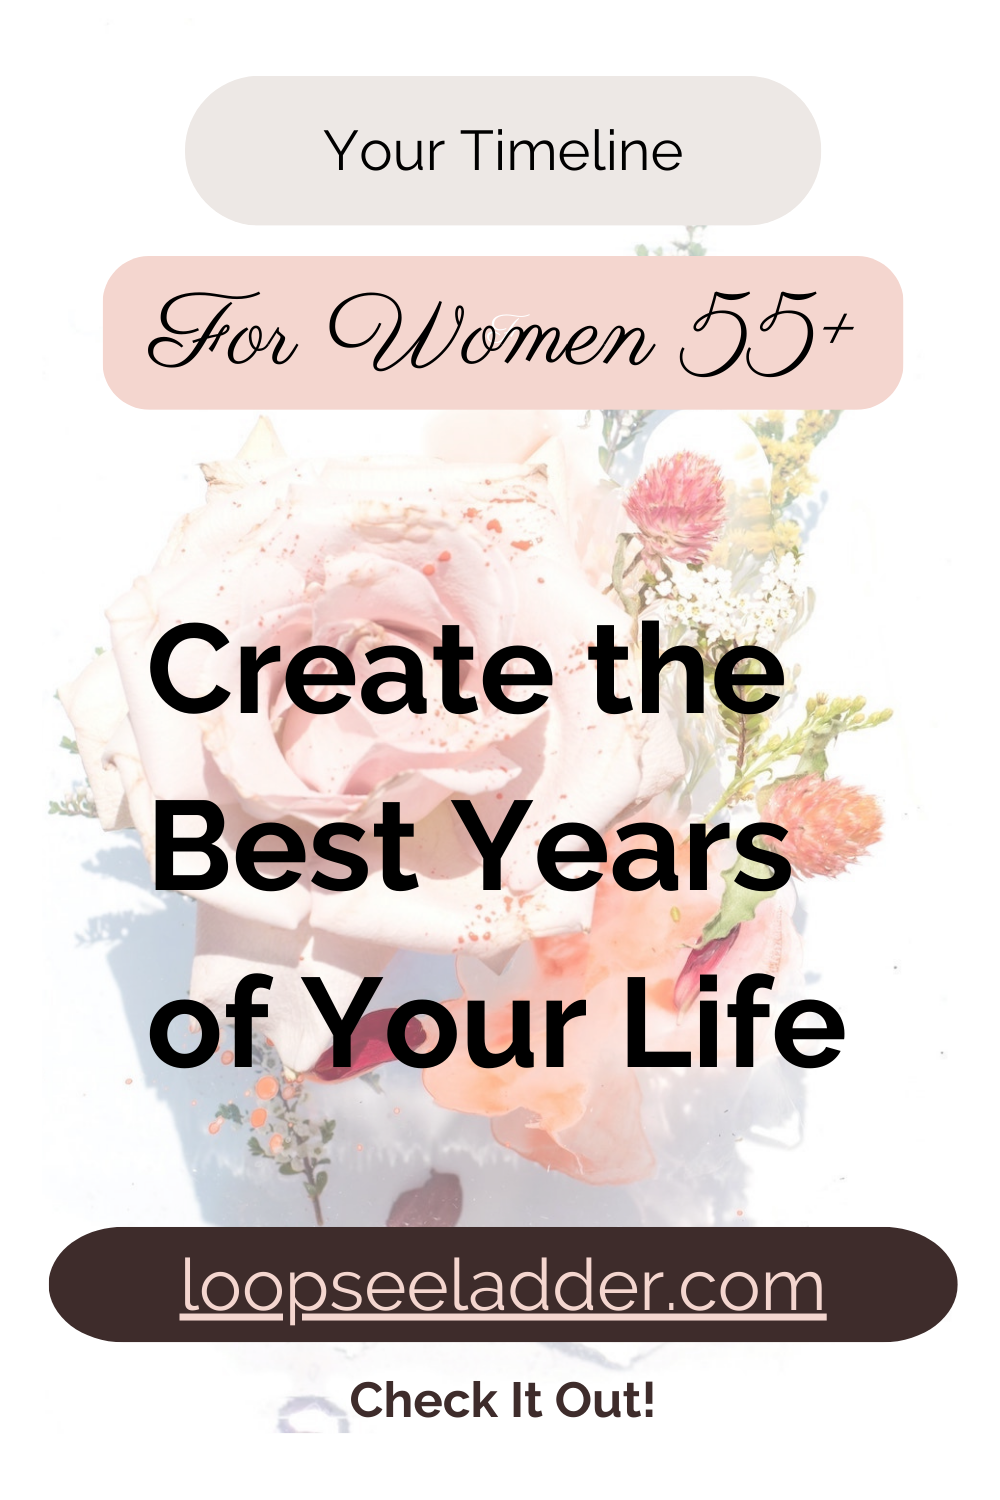 Why Women Over 55 are Creating the Best Years of Their Lives